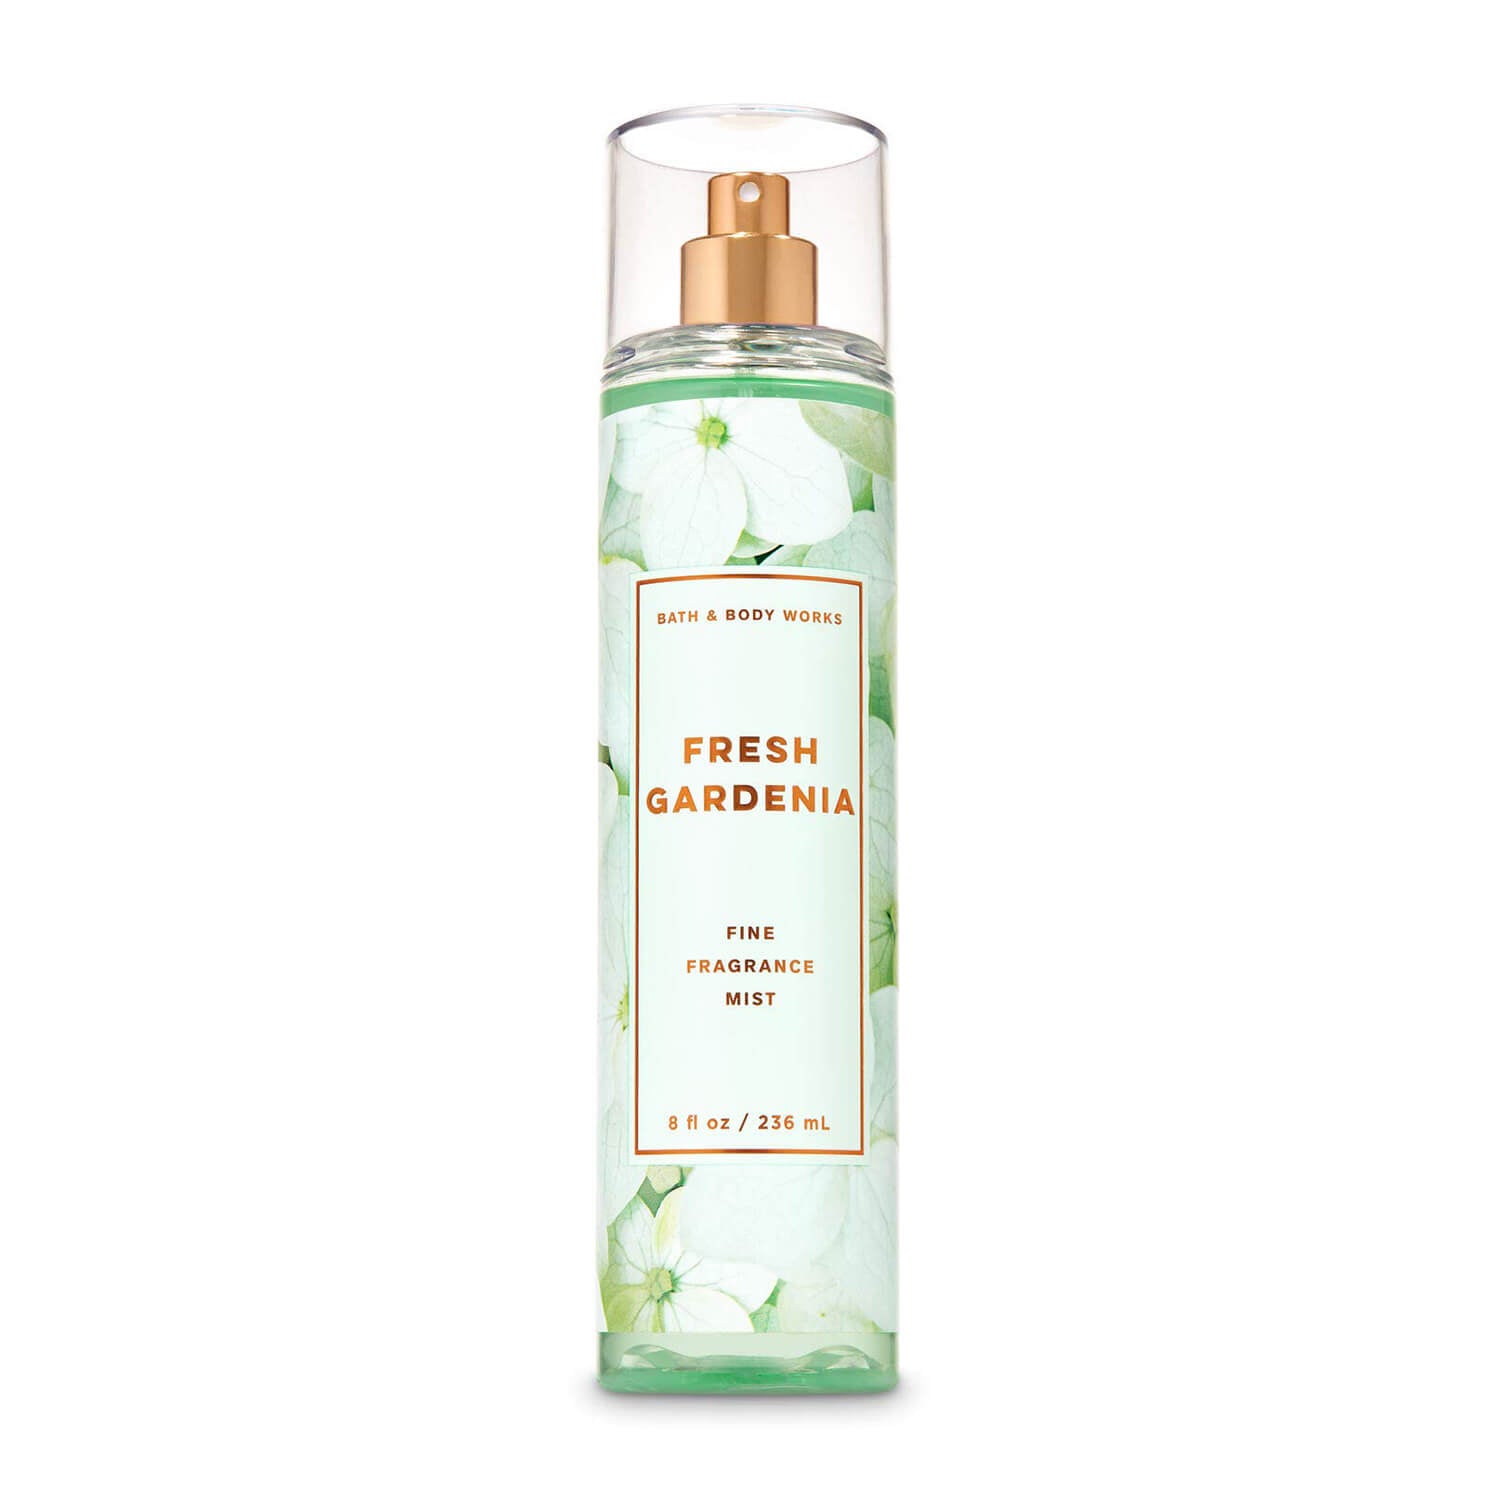 Shop 100% original Bath and Body Works mist in Fresh Gardenia fragrance available at Heygirl.pk for delivery in Pakistan